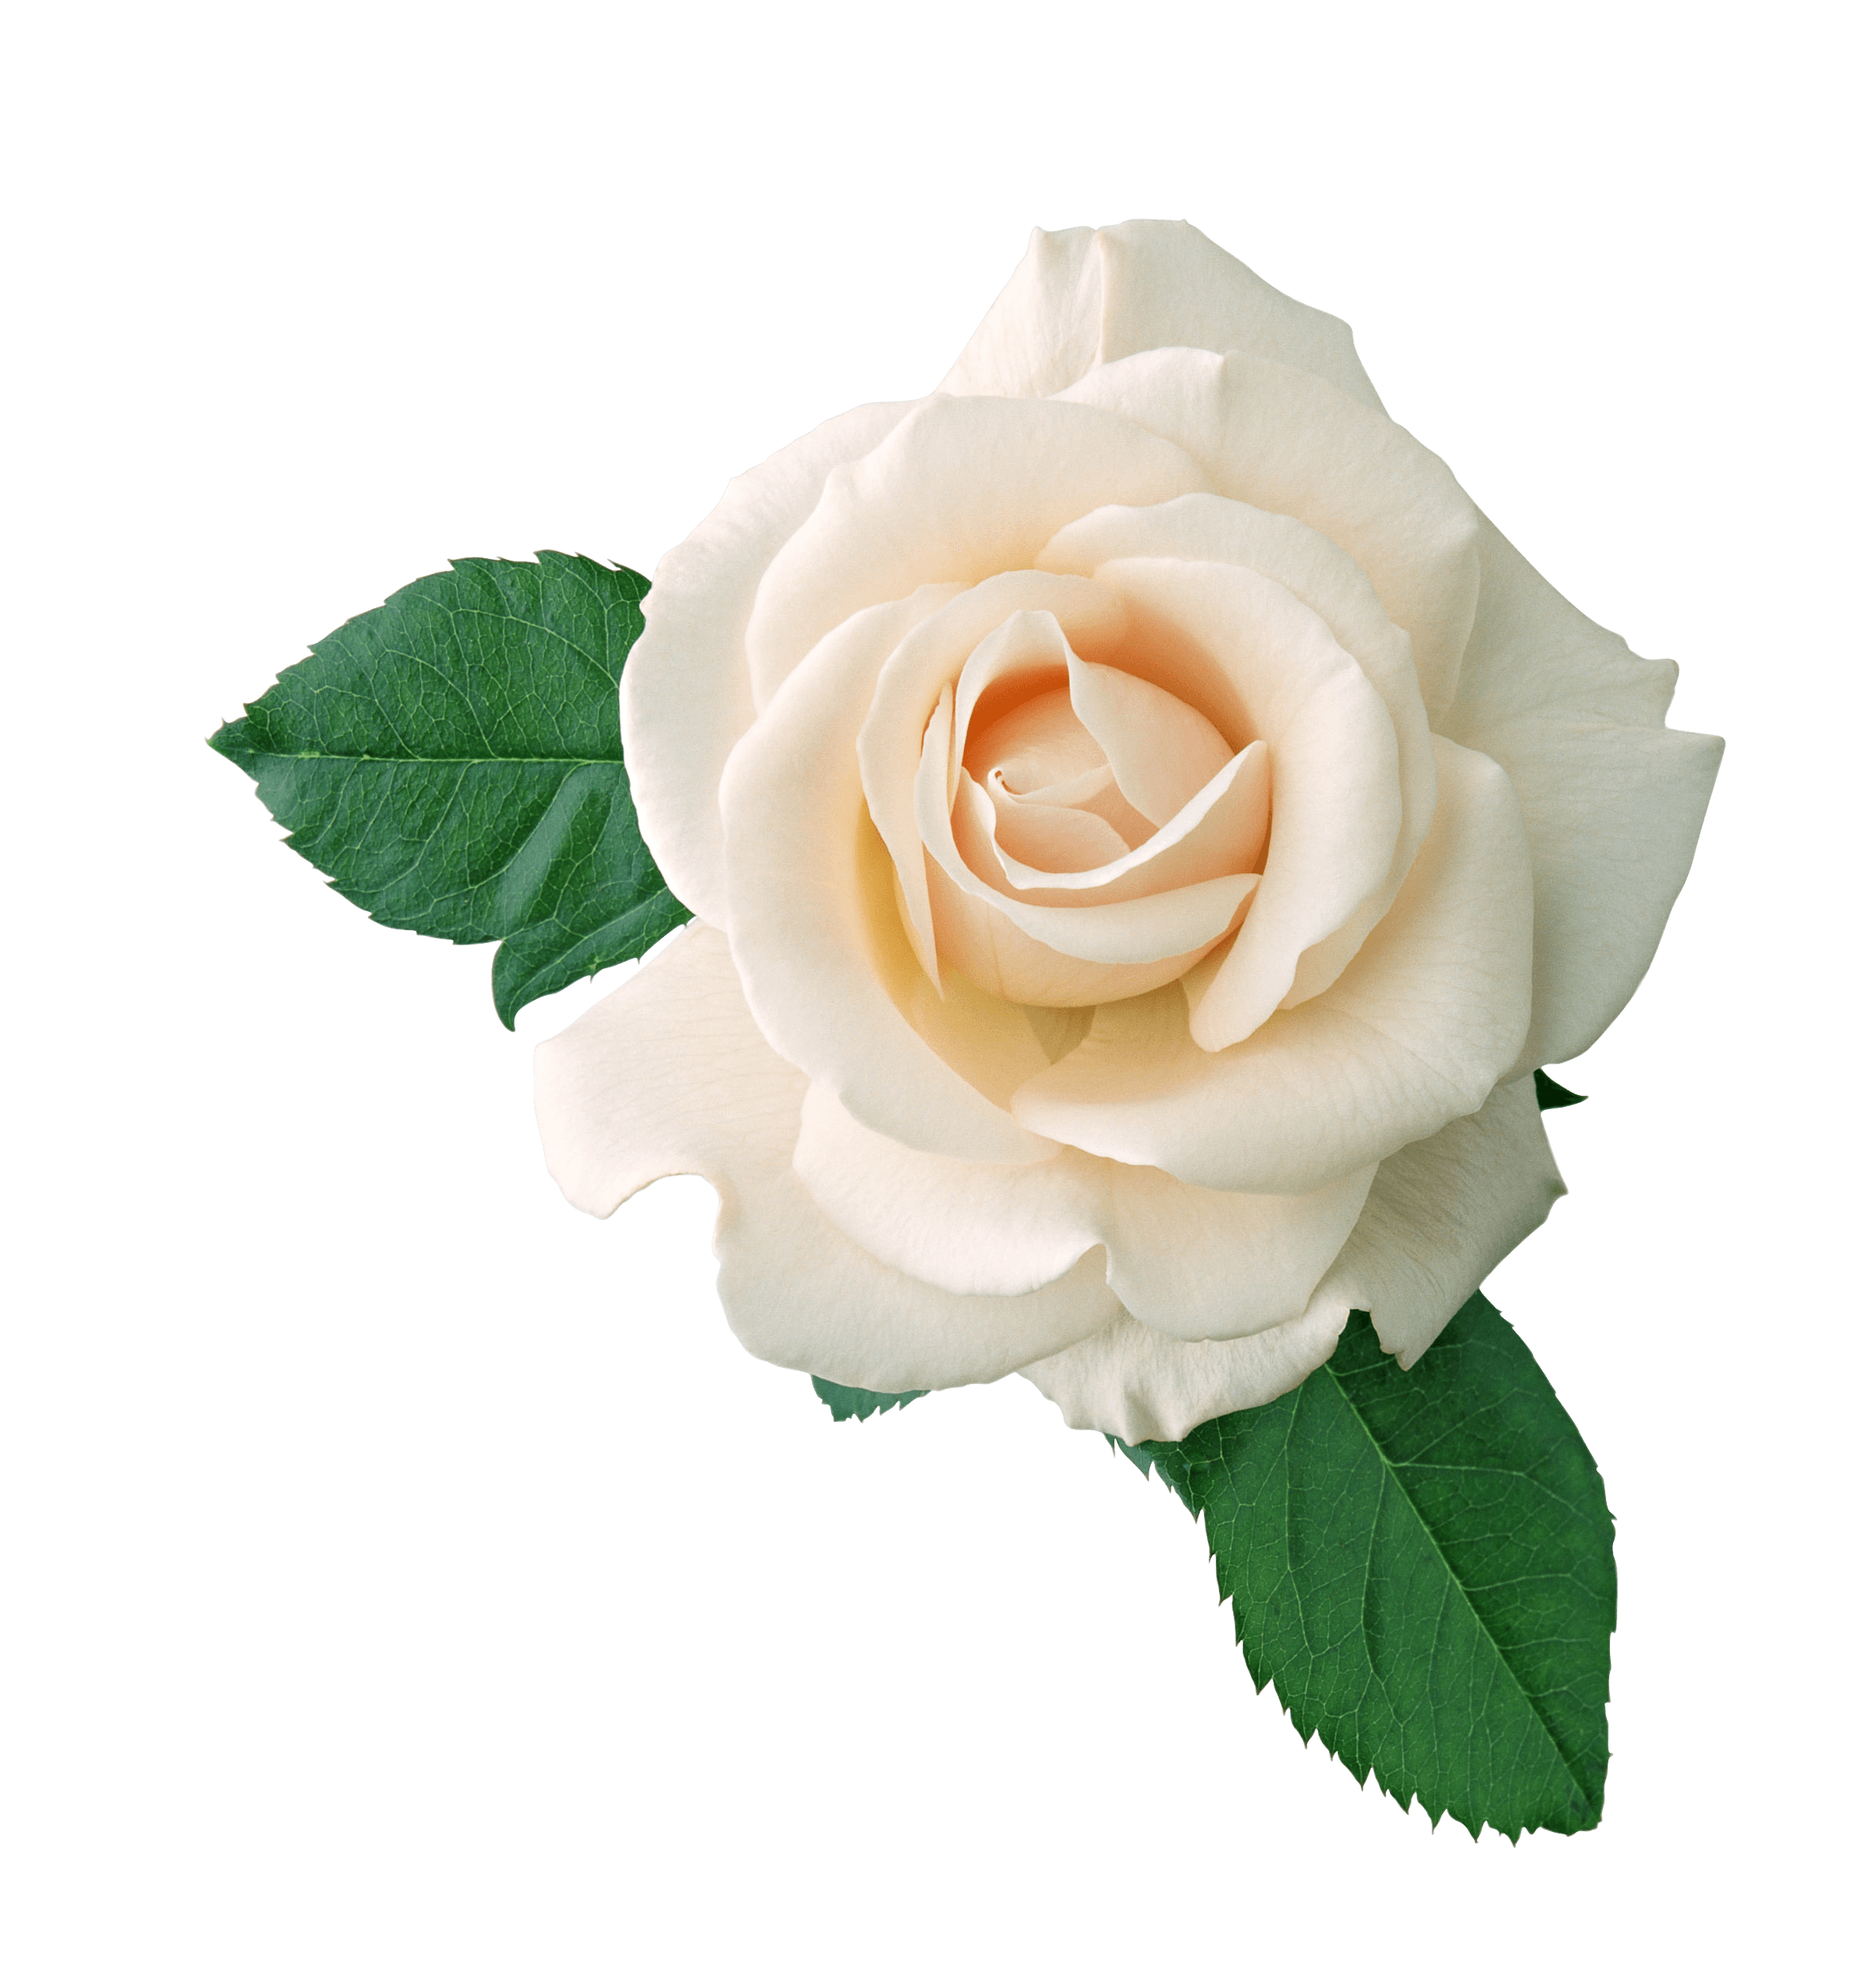 White Rose on Leaves PNG Image in High Definition pngteam.com